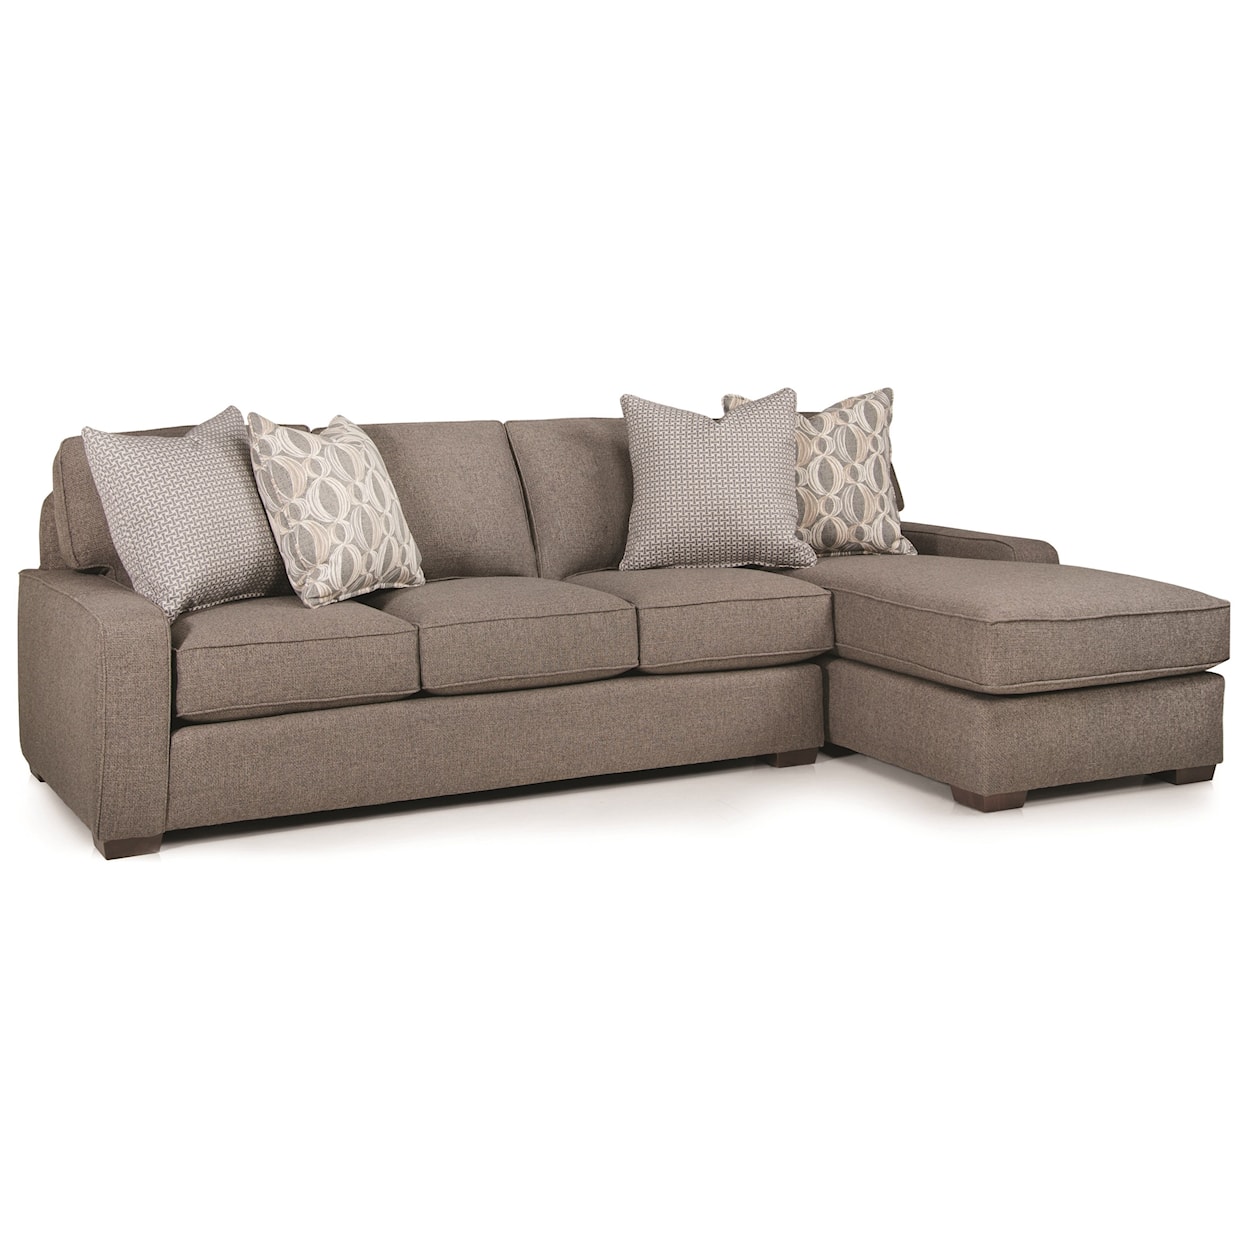 Smith Brothers Build Your Own (8000 Series) Sectional